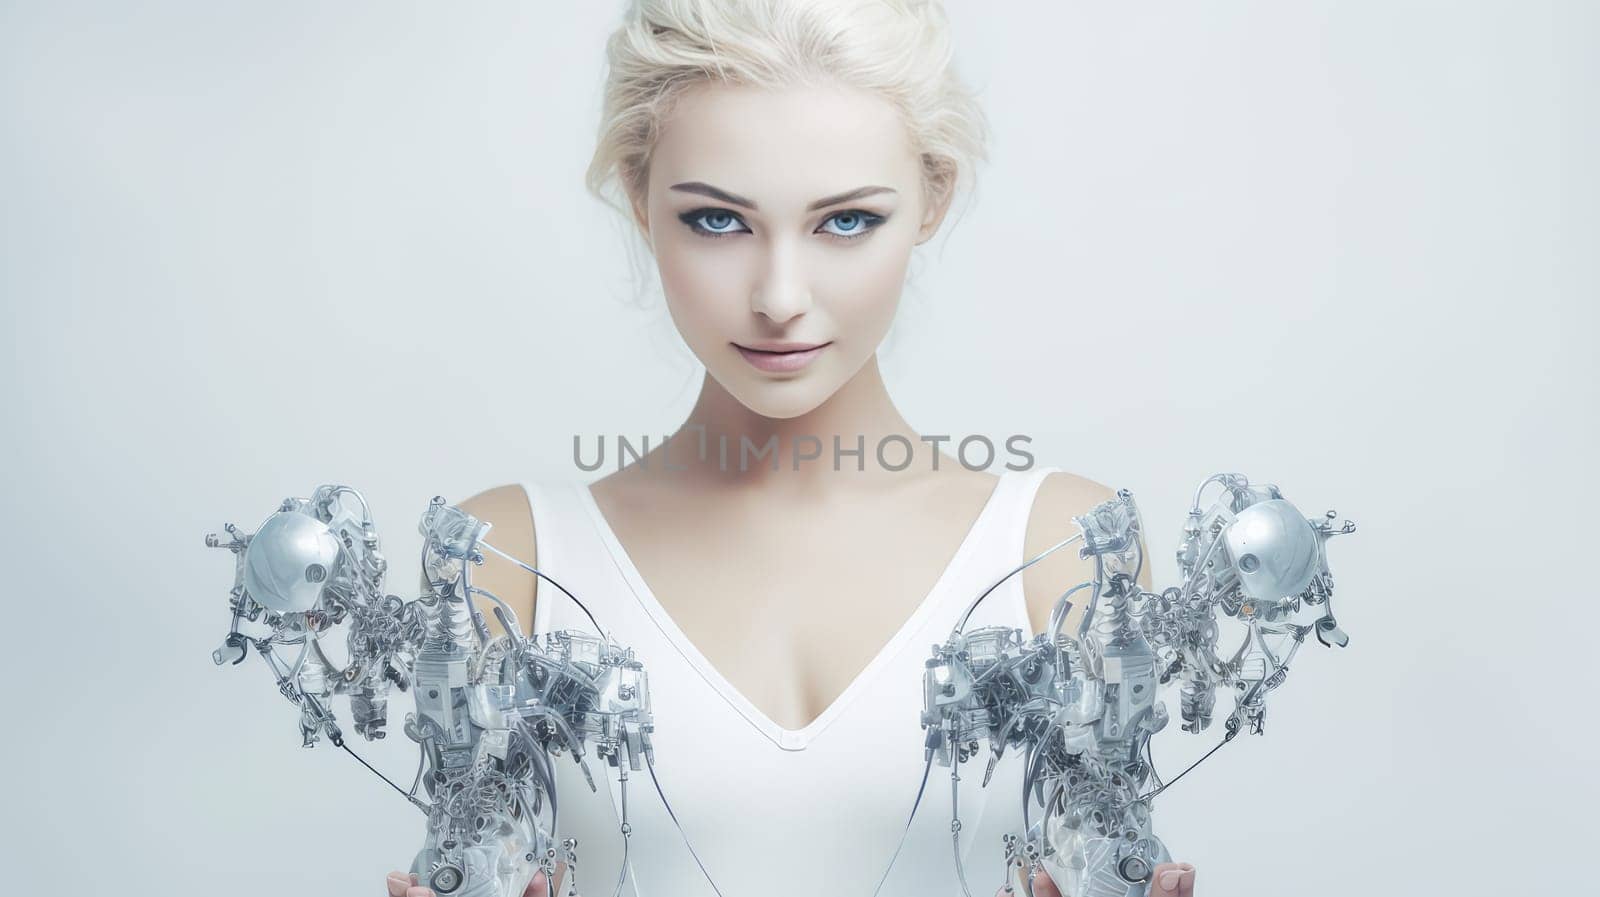 Robot cyborg woman girl with blond hair with artificial intelligence, future technologies. Internet and digital technologies. Global network. Integrating technology and human interaction. Chat bot. Digital technologies of the future